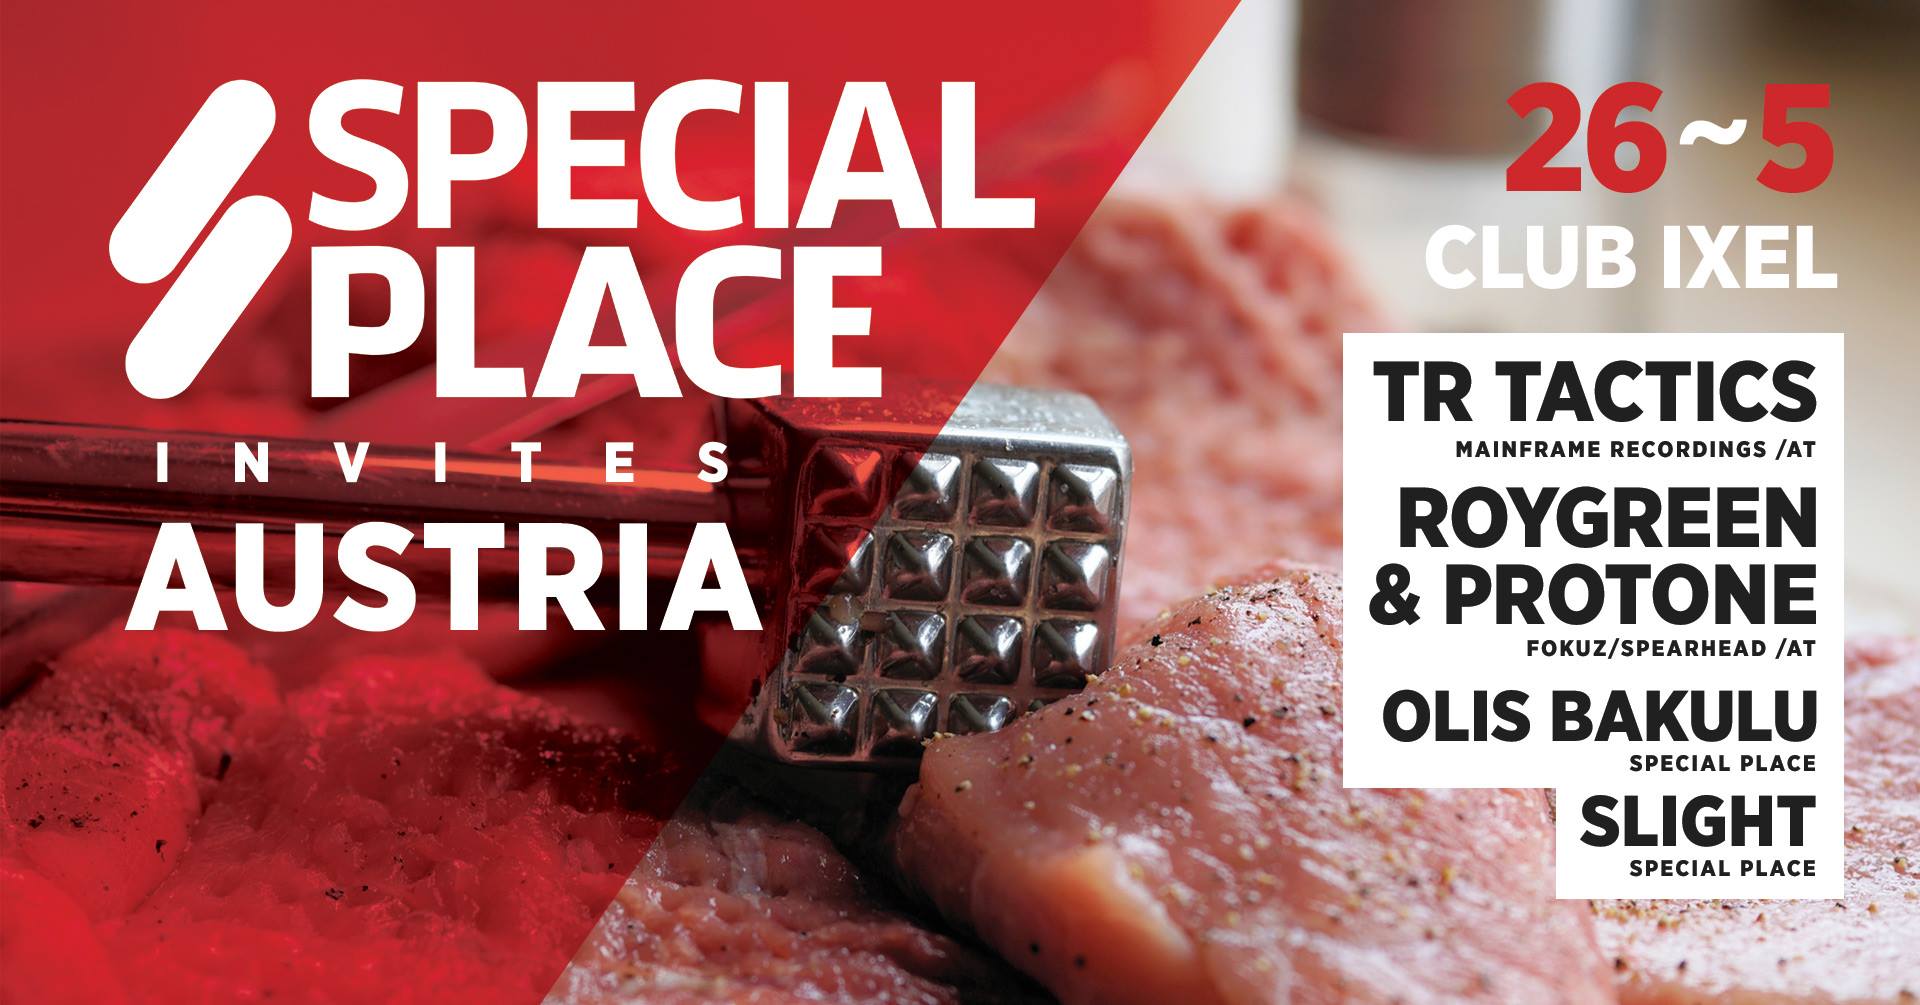 Special Place invites Austria! Entry only 3 Eur!